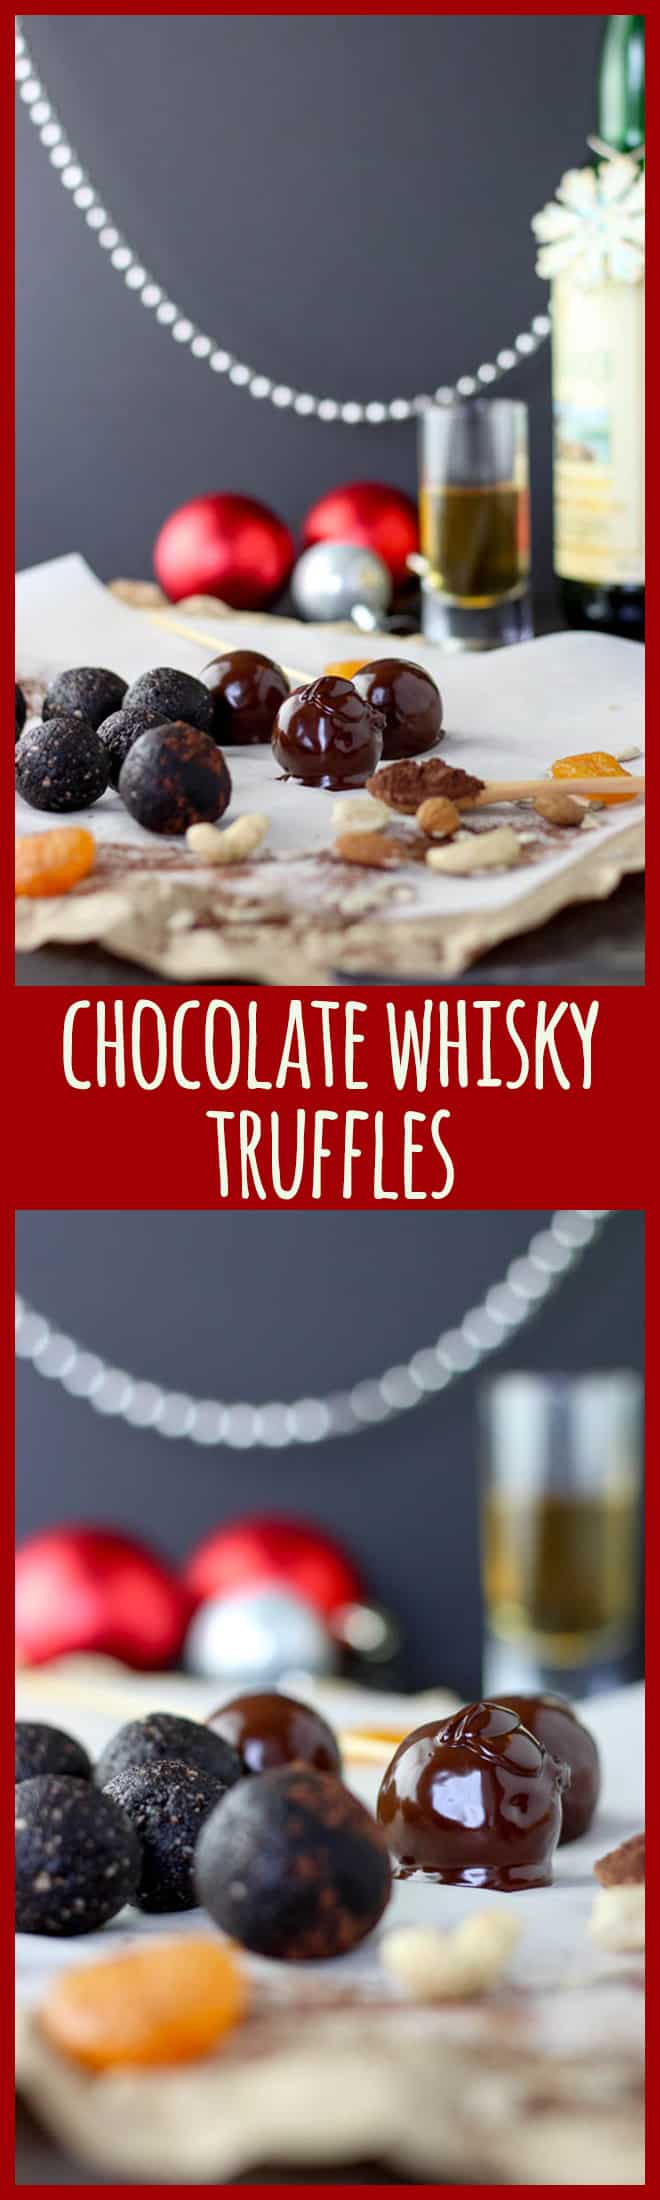 These truffles are Decadent with capital D. Dark and chocolatey, moist and very adult with the flavour of a good single malt whisky running through them. Just what Santa ordered.